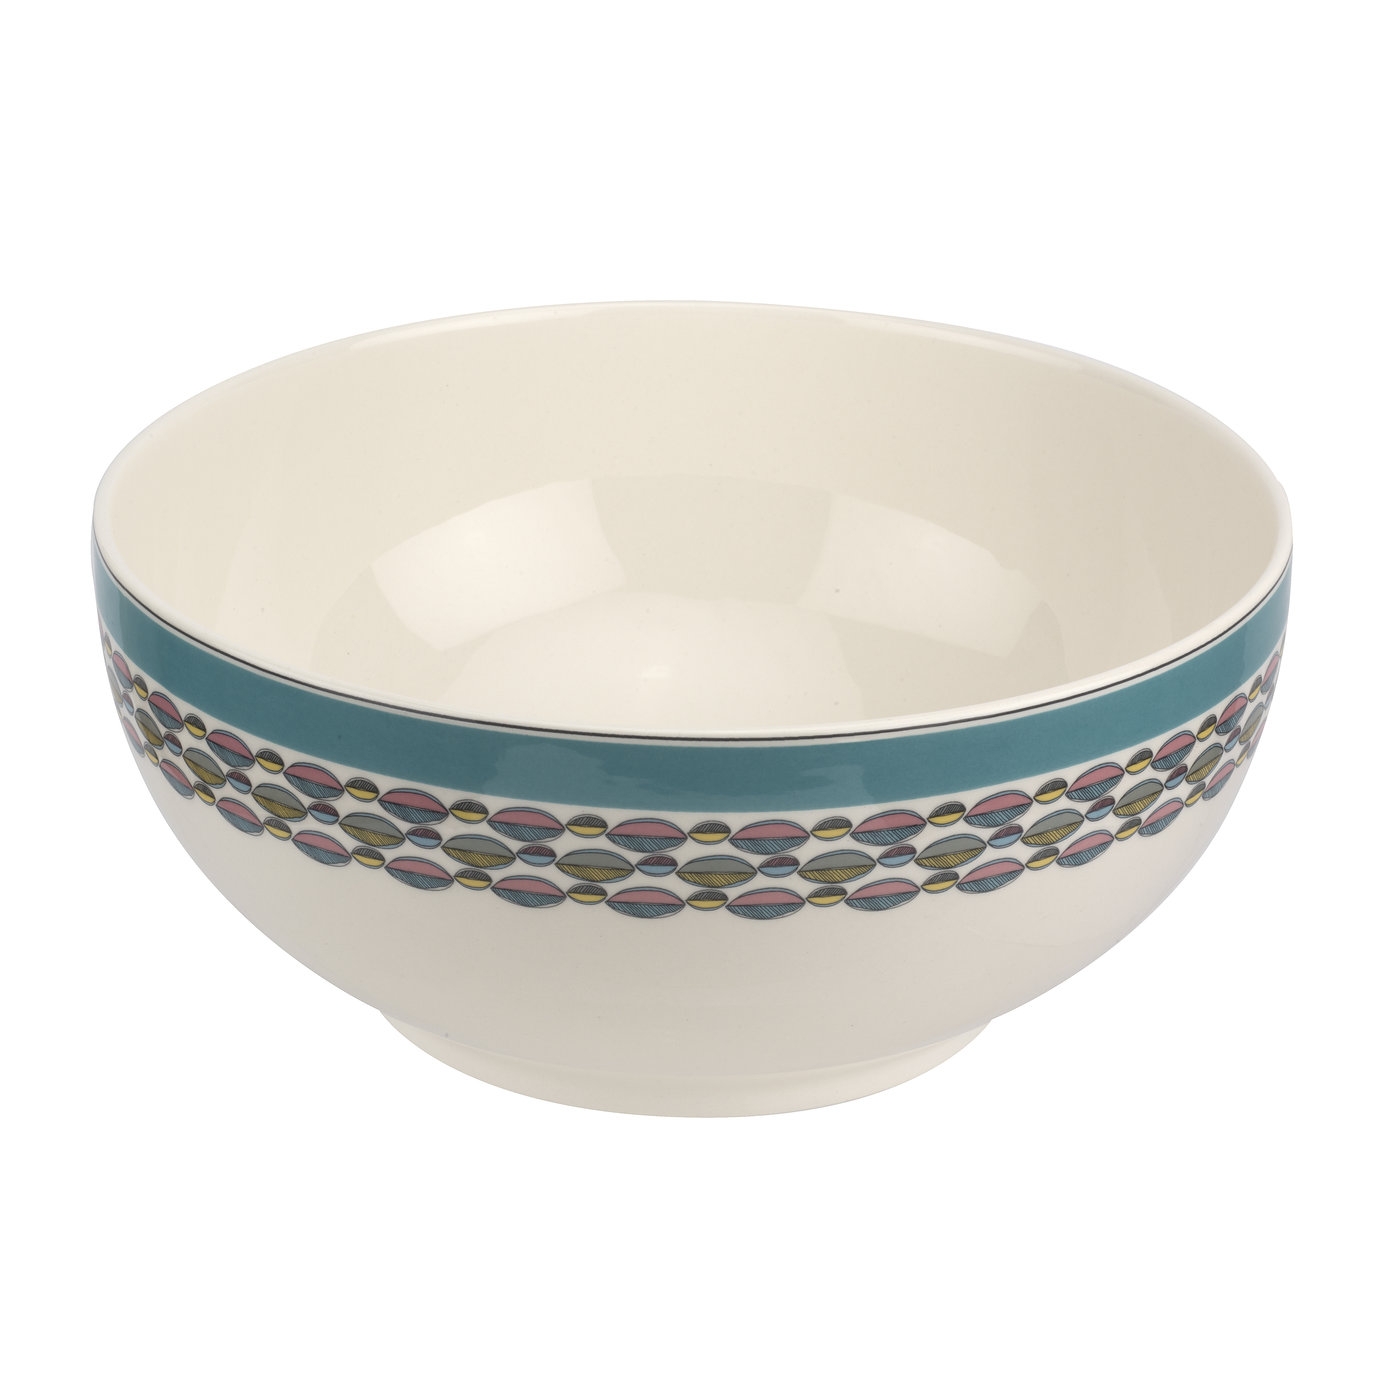 Westerly Turquoise 10.75 Inch Deep Bowl image number null